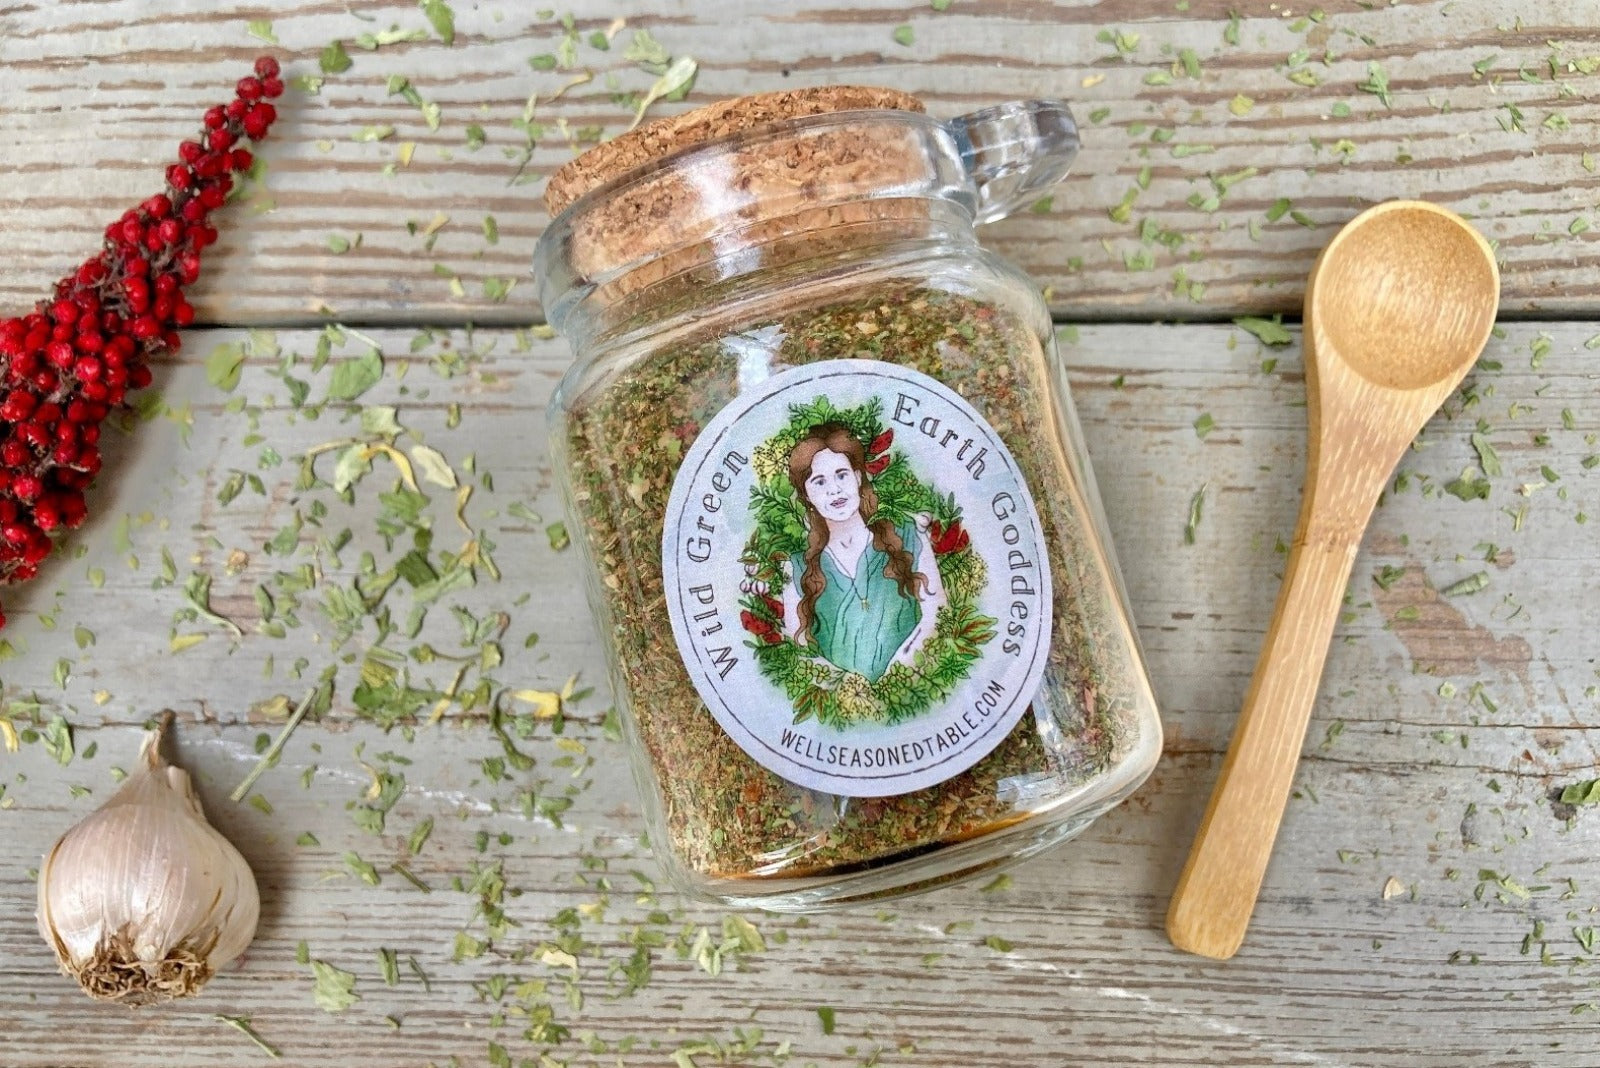 A Glass jar with cork and label and a small wooden spoon on a wooden background with dried herbs, garlic, and sumac around it.